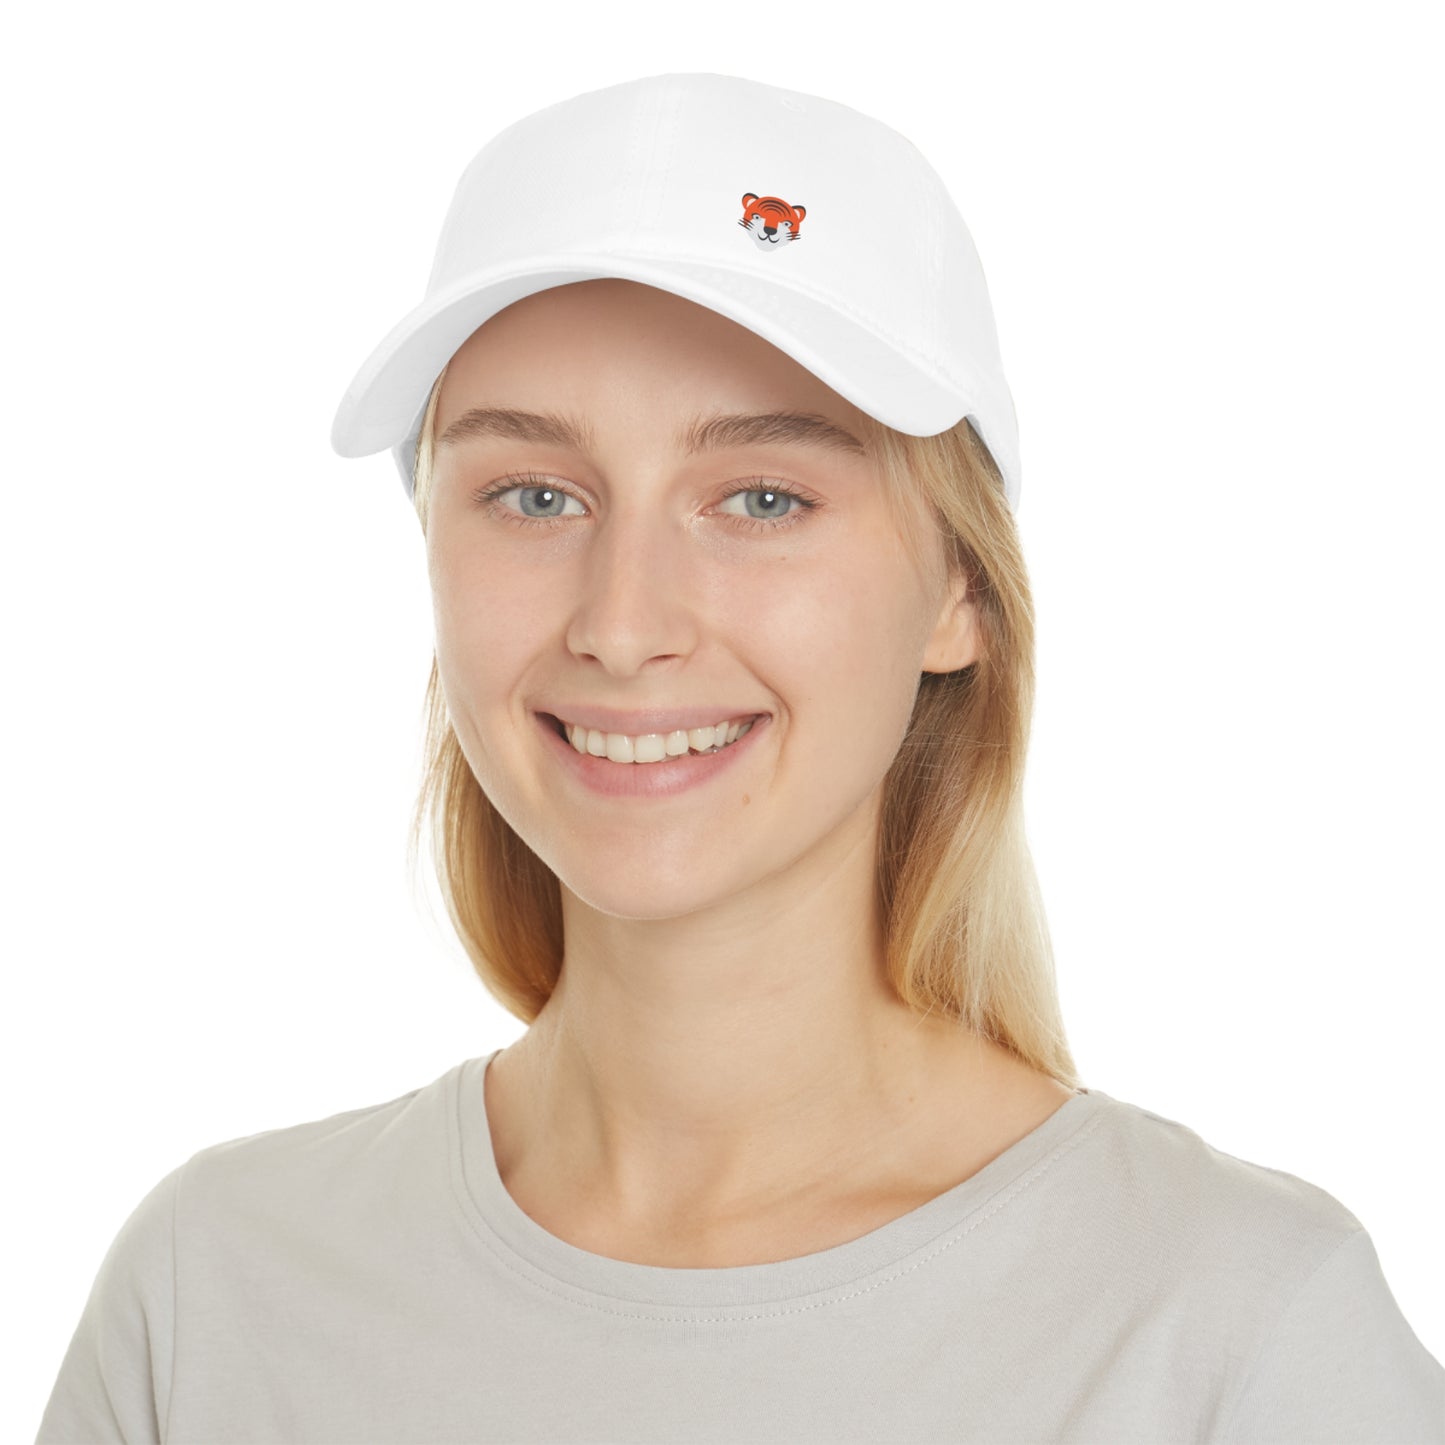 South Tiger Baseball Cap Classic Tiger Face  (Multiple Colors Available)